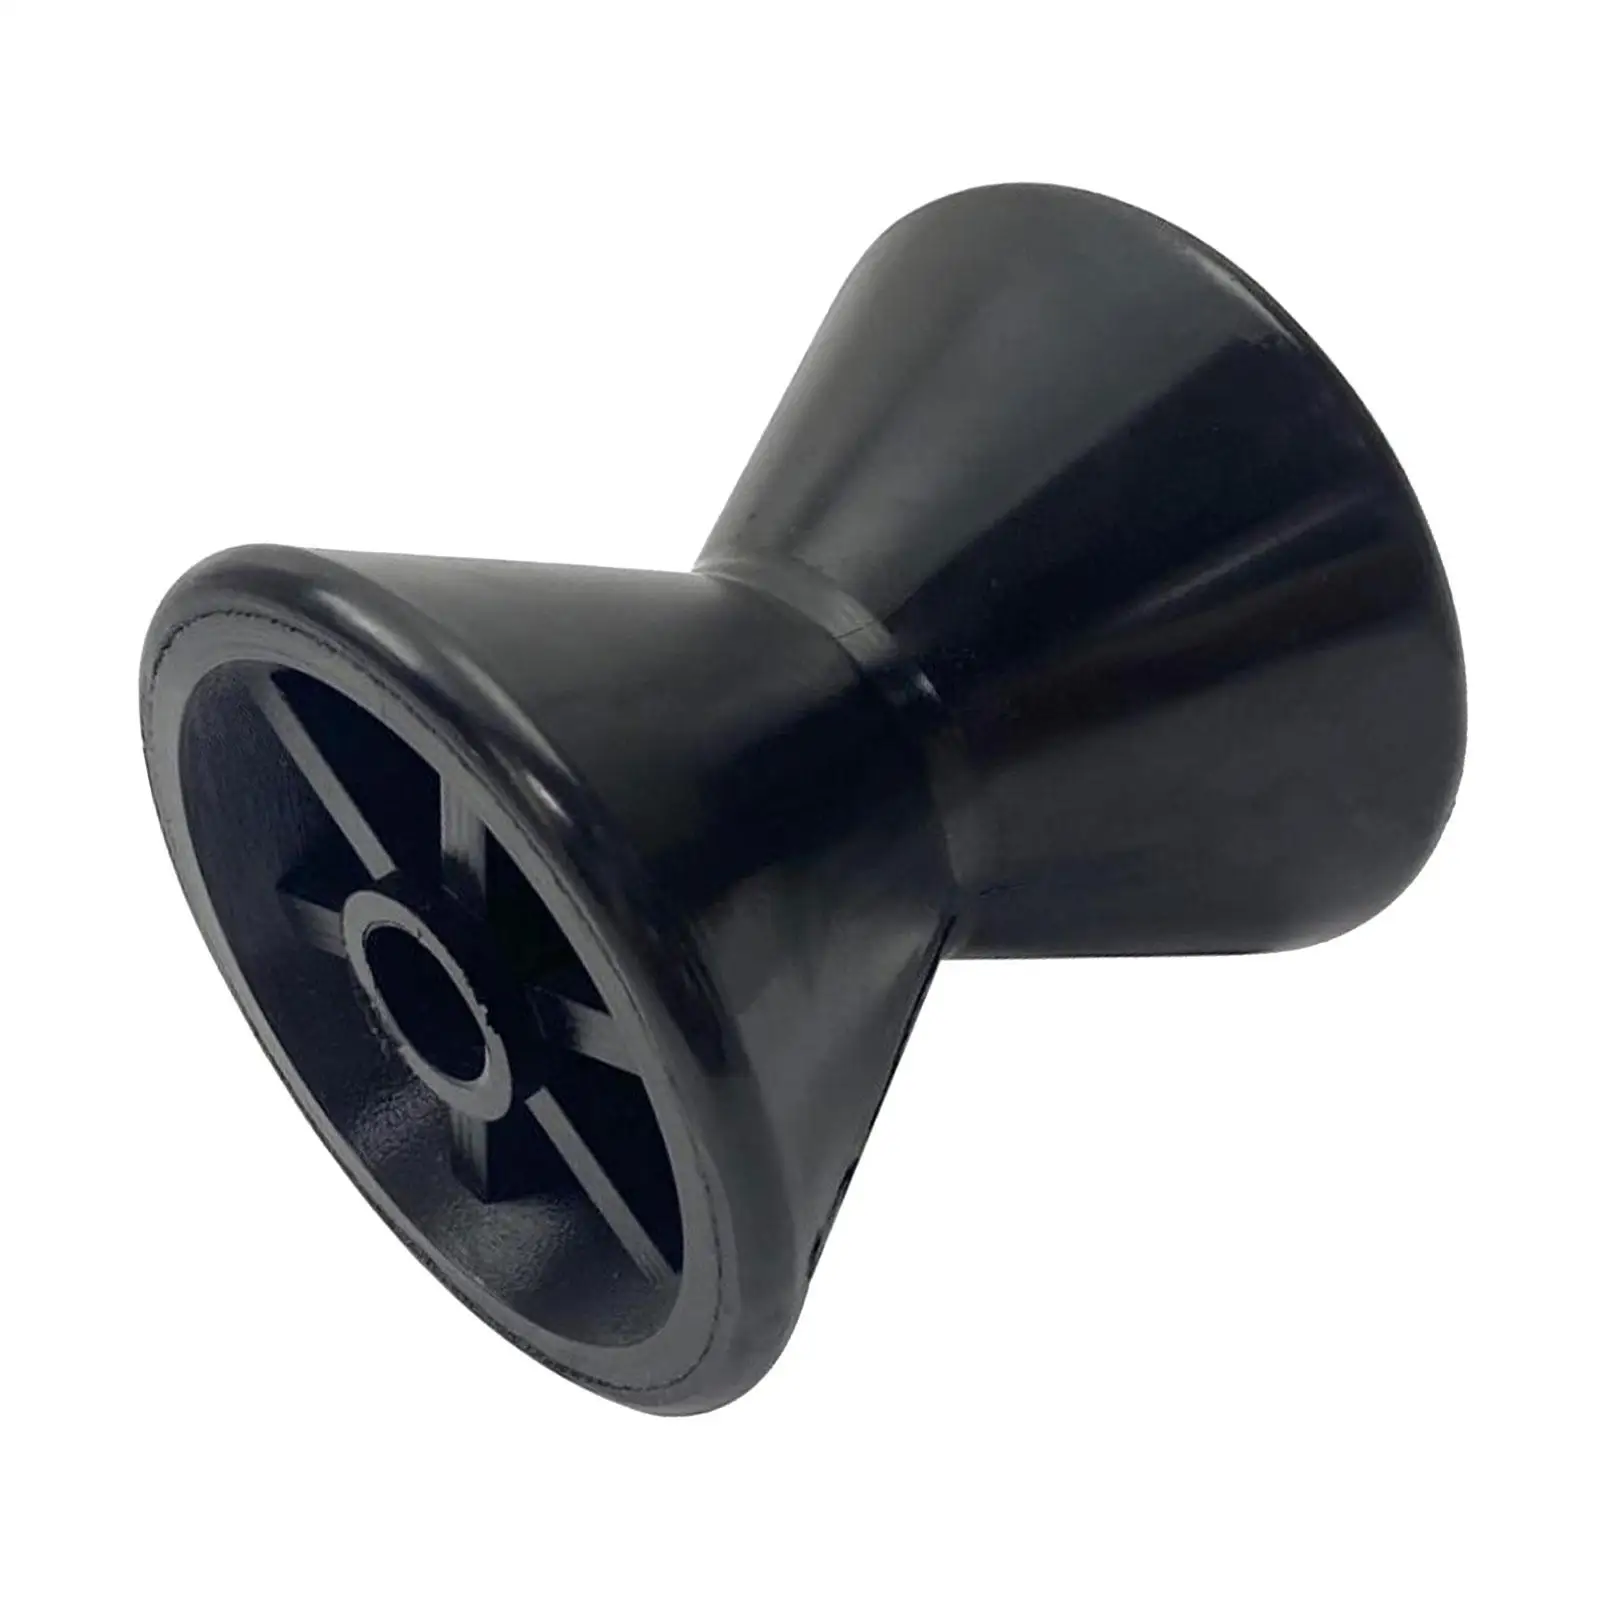 Bow Roller 3.5 inch Professional Fittings Direct Replaces Rubber Bow Roller